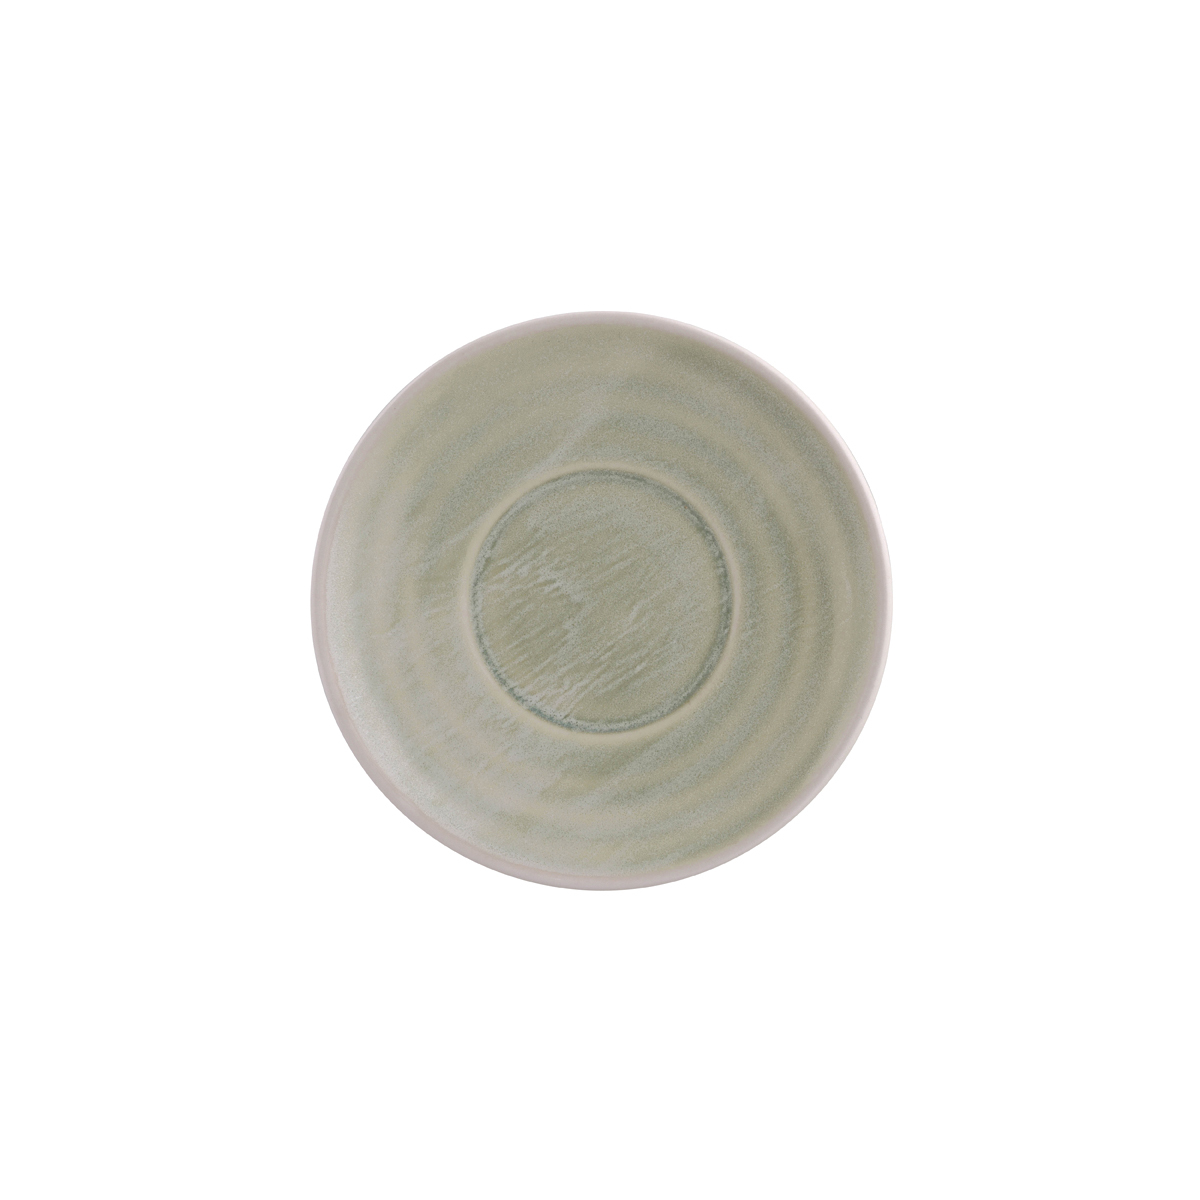 Moda Porcelain Lush Round Share Bowl (3 Sizes) - Chef's Complements